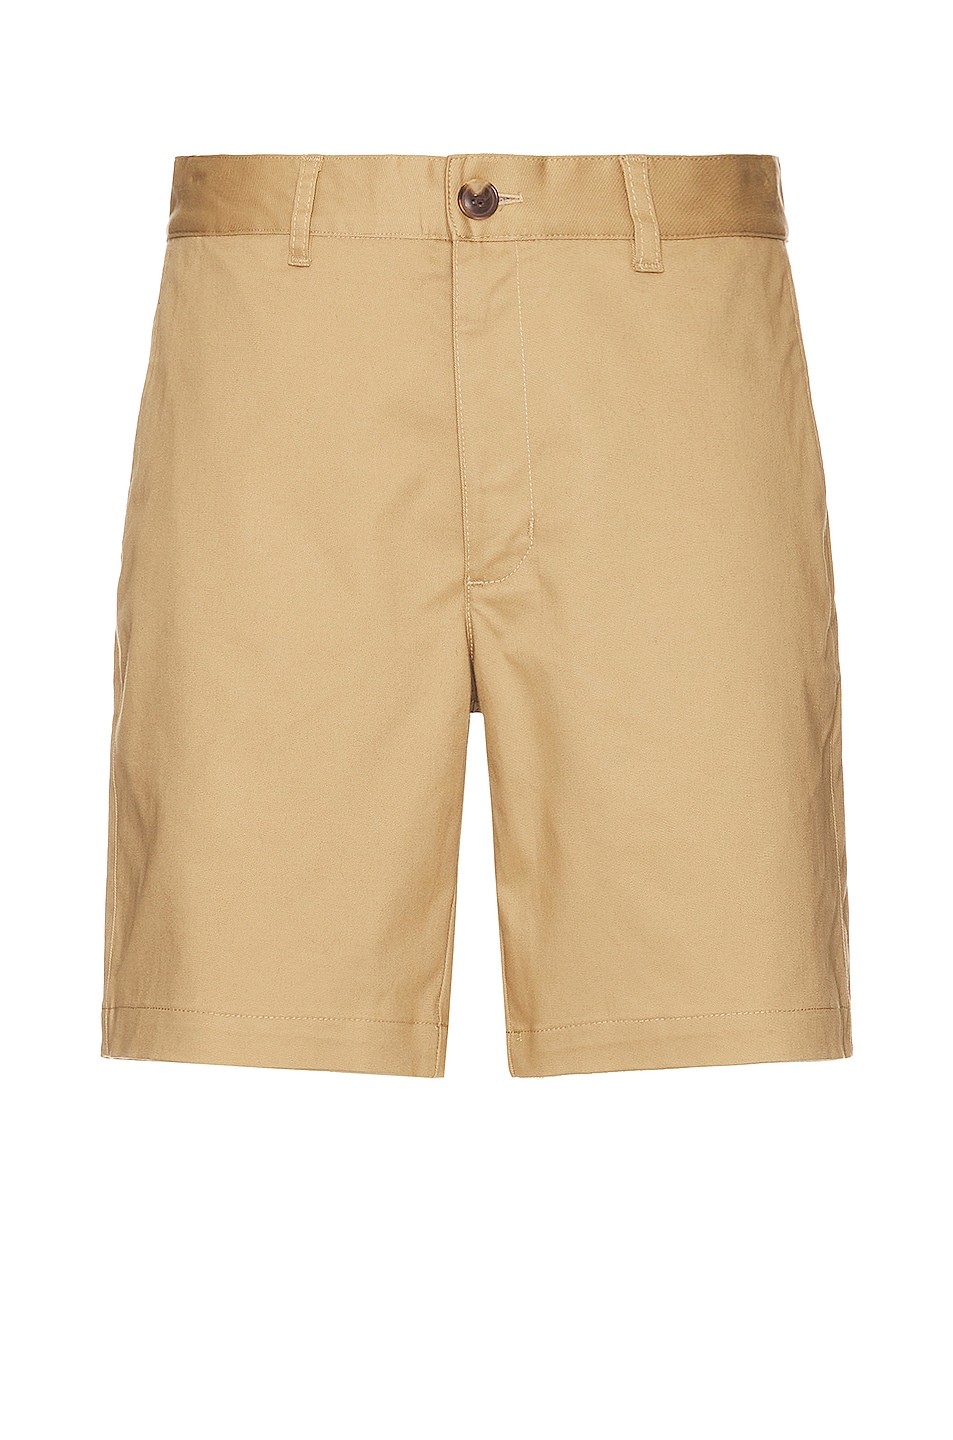 The Chino Short in Brown